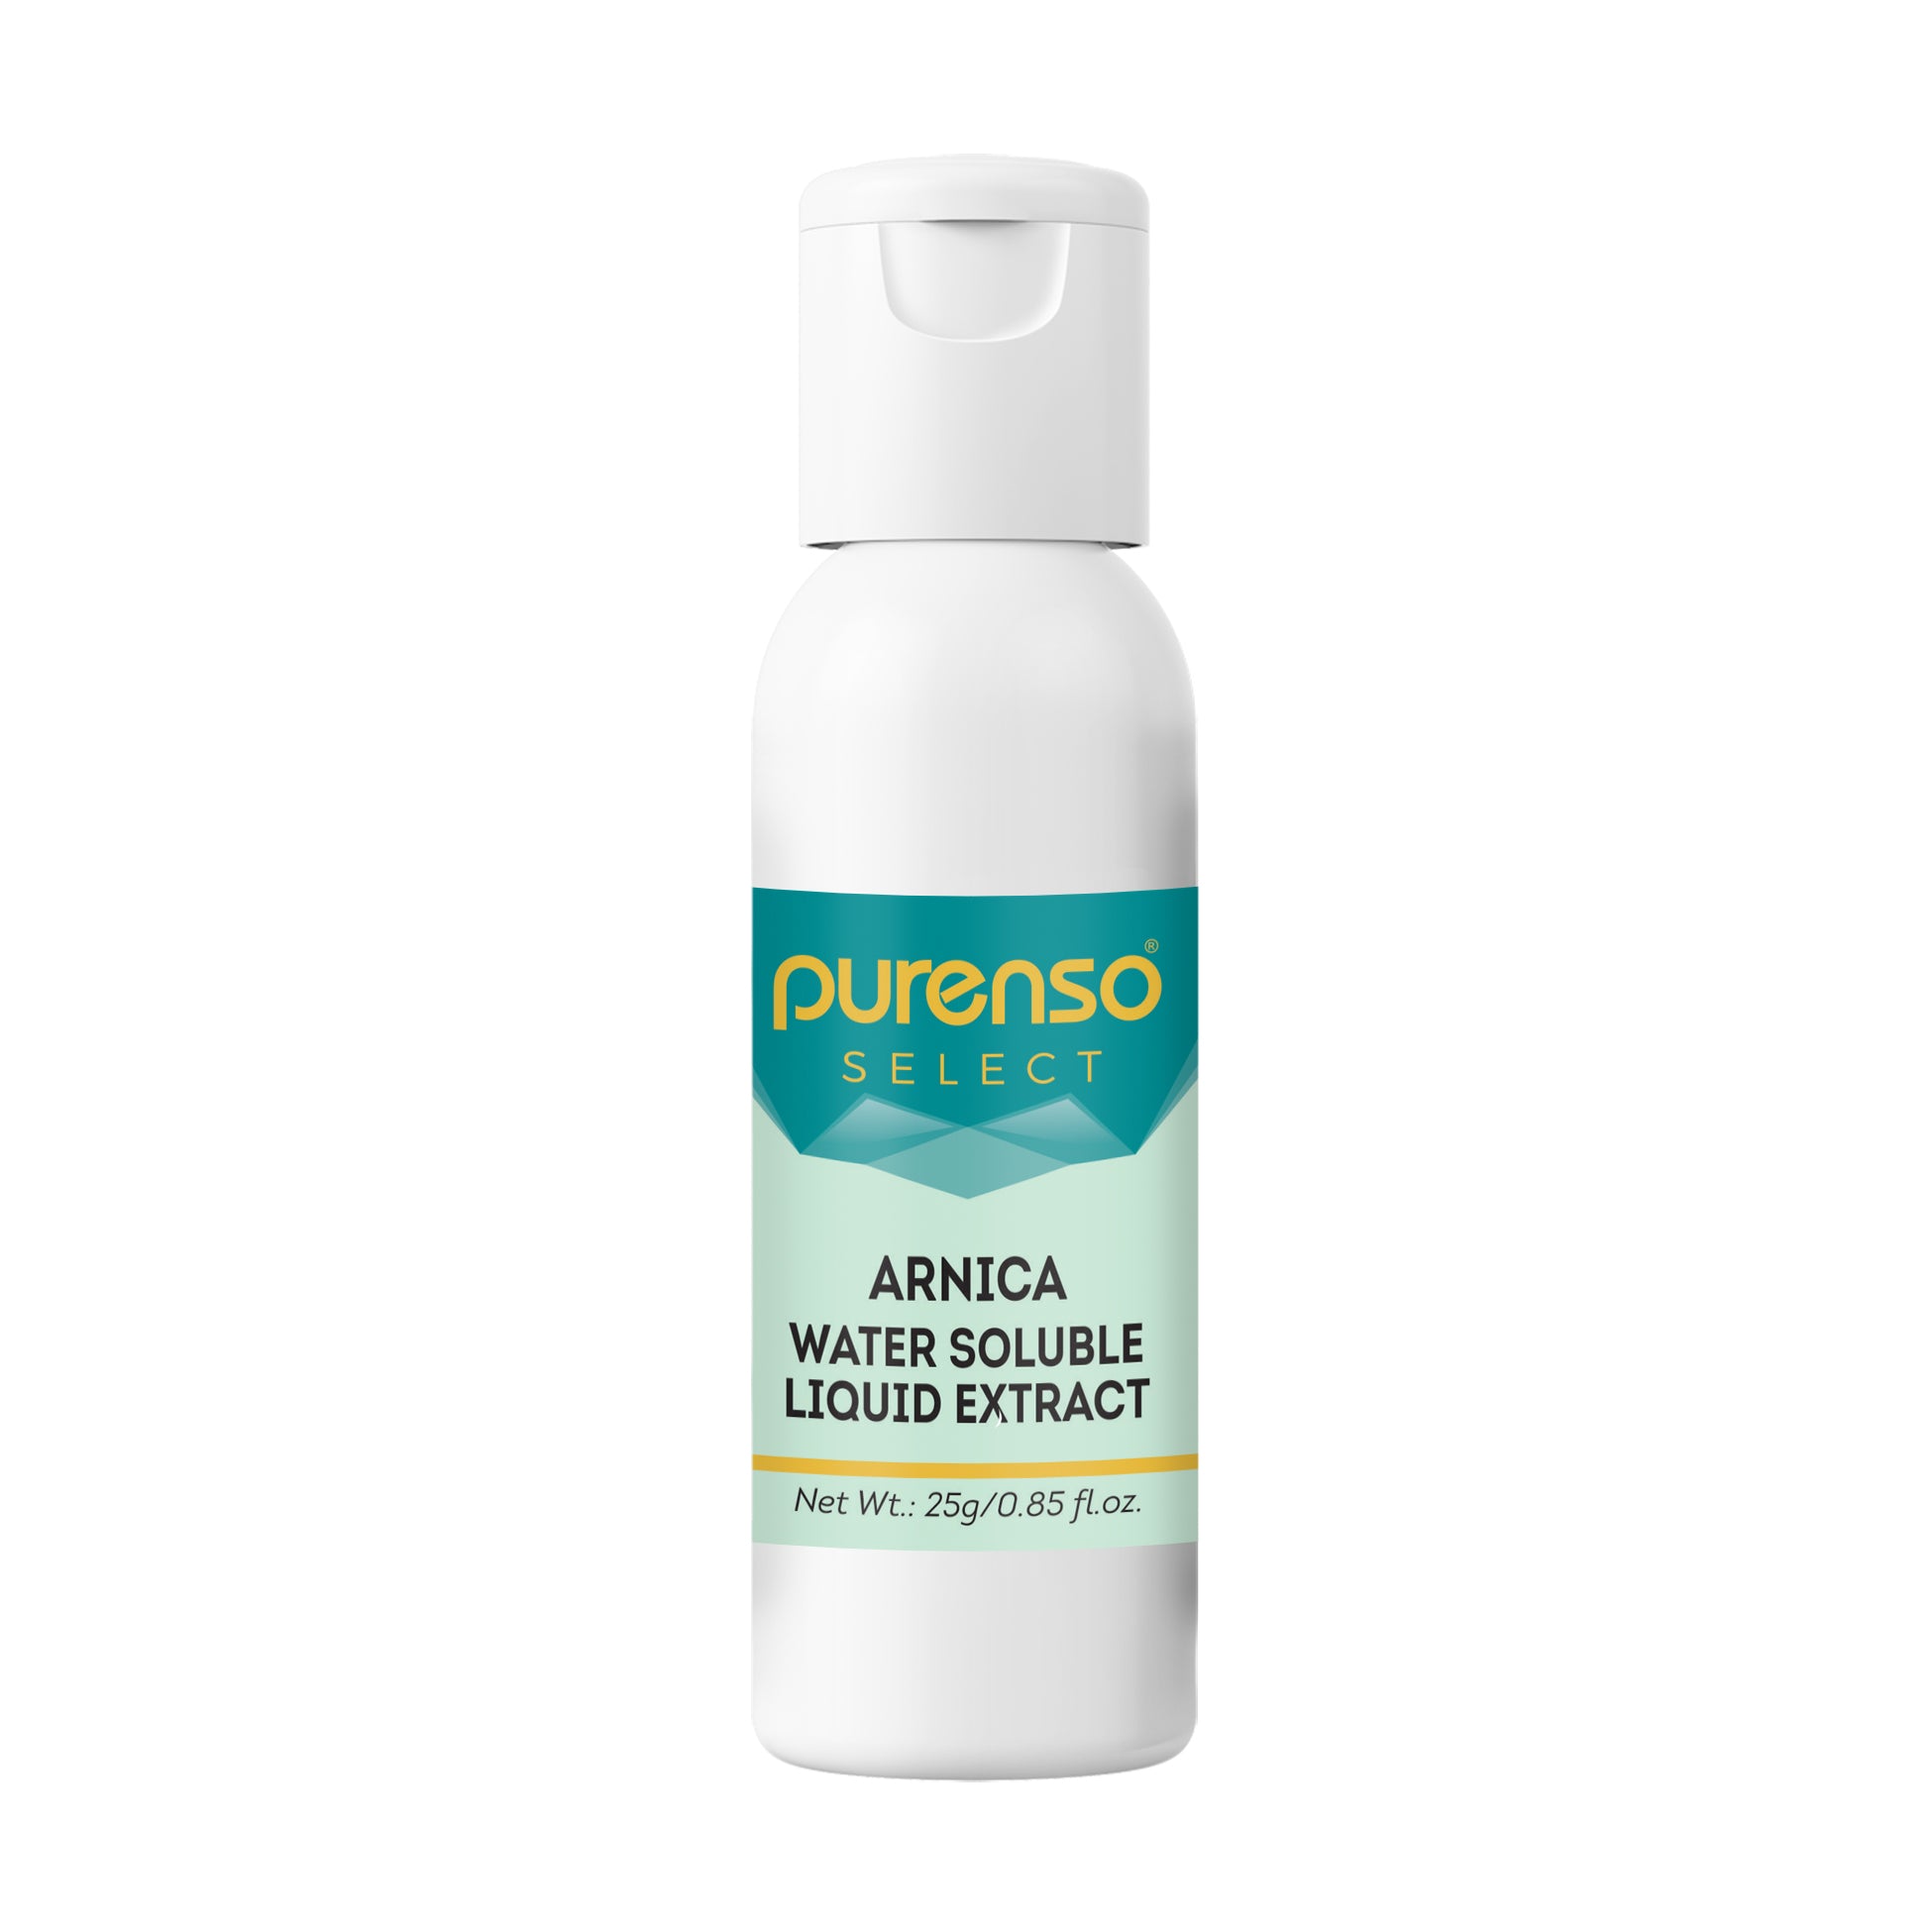 Arnica Liquid Extract - Water Soluble